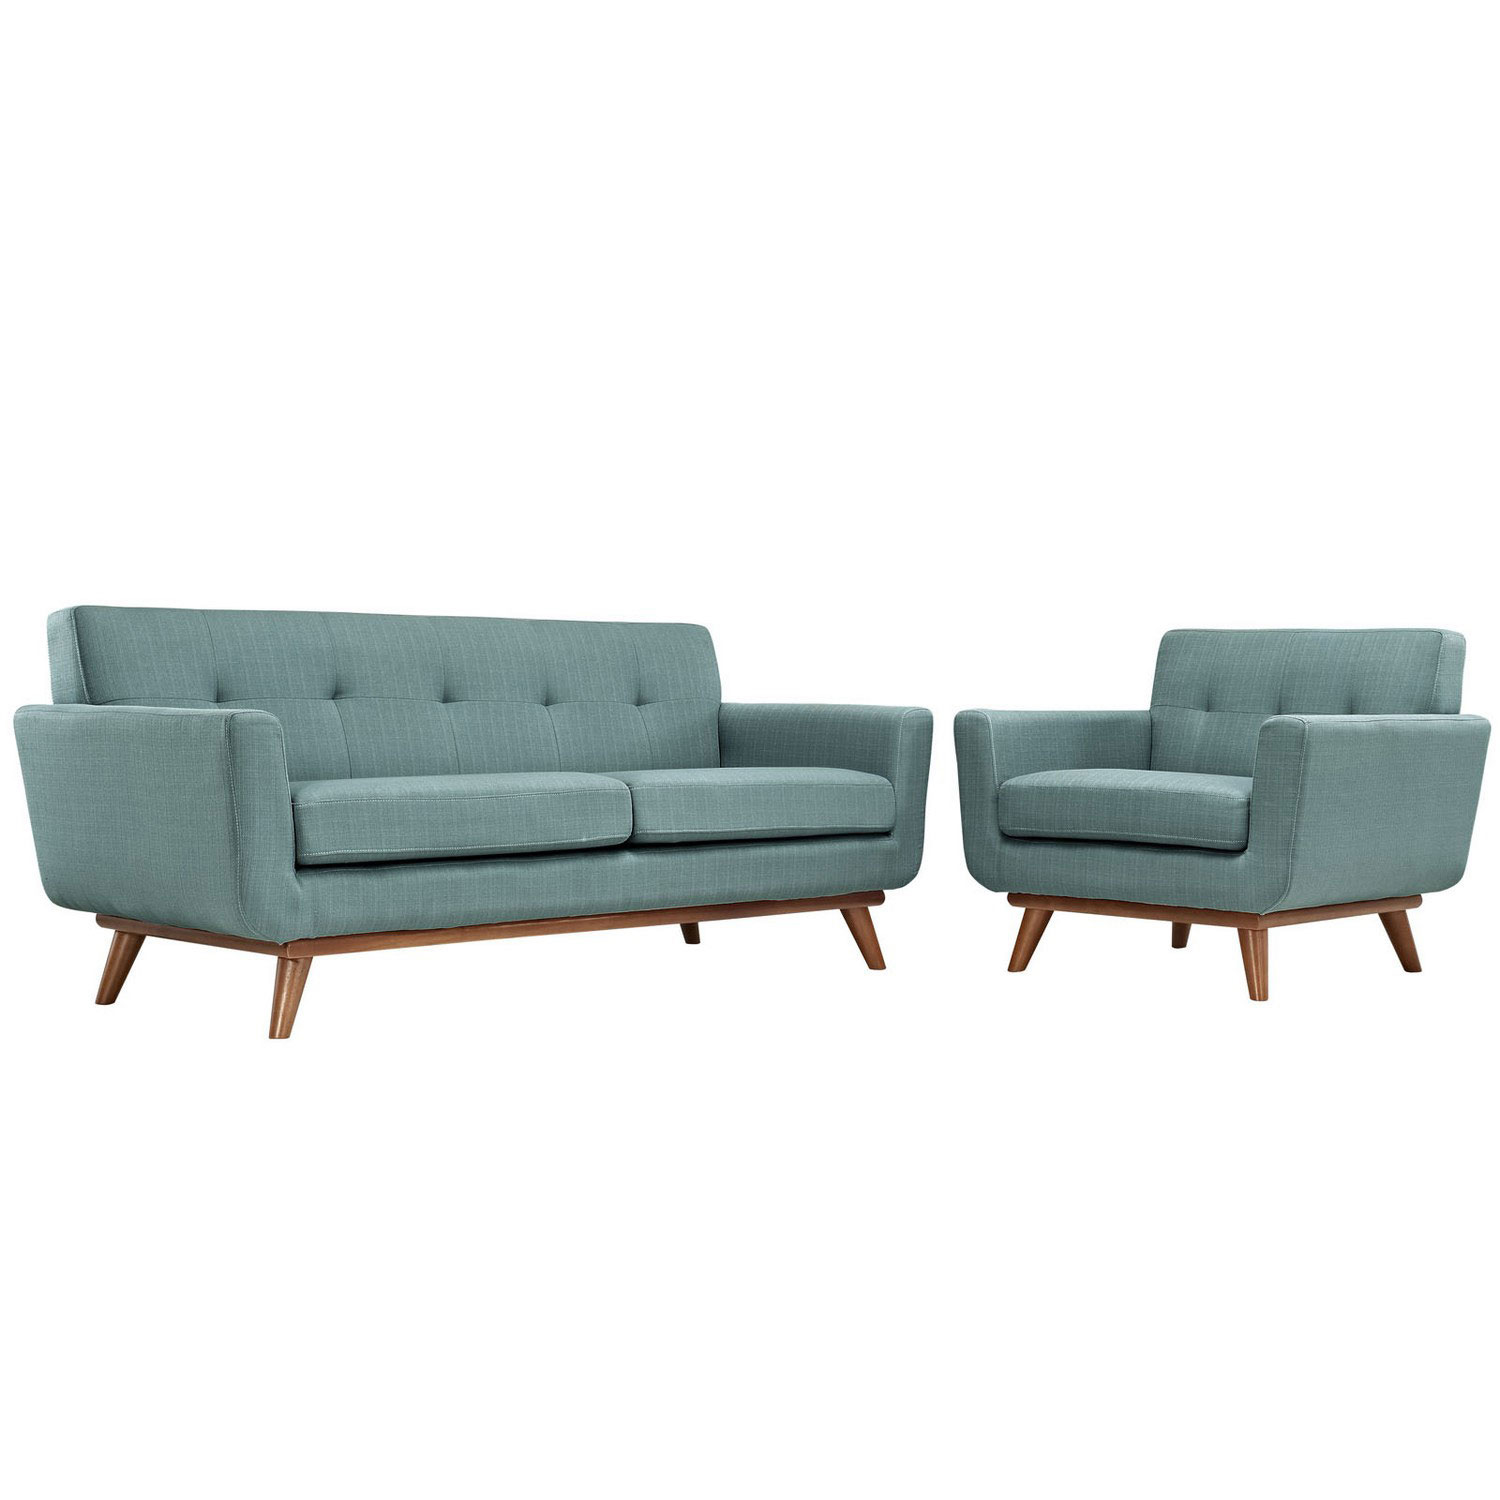 Modway Engage Armchair and Loveseat Set of 2 - Laguna